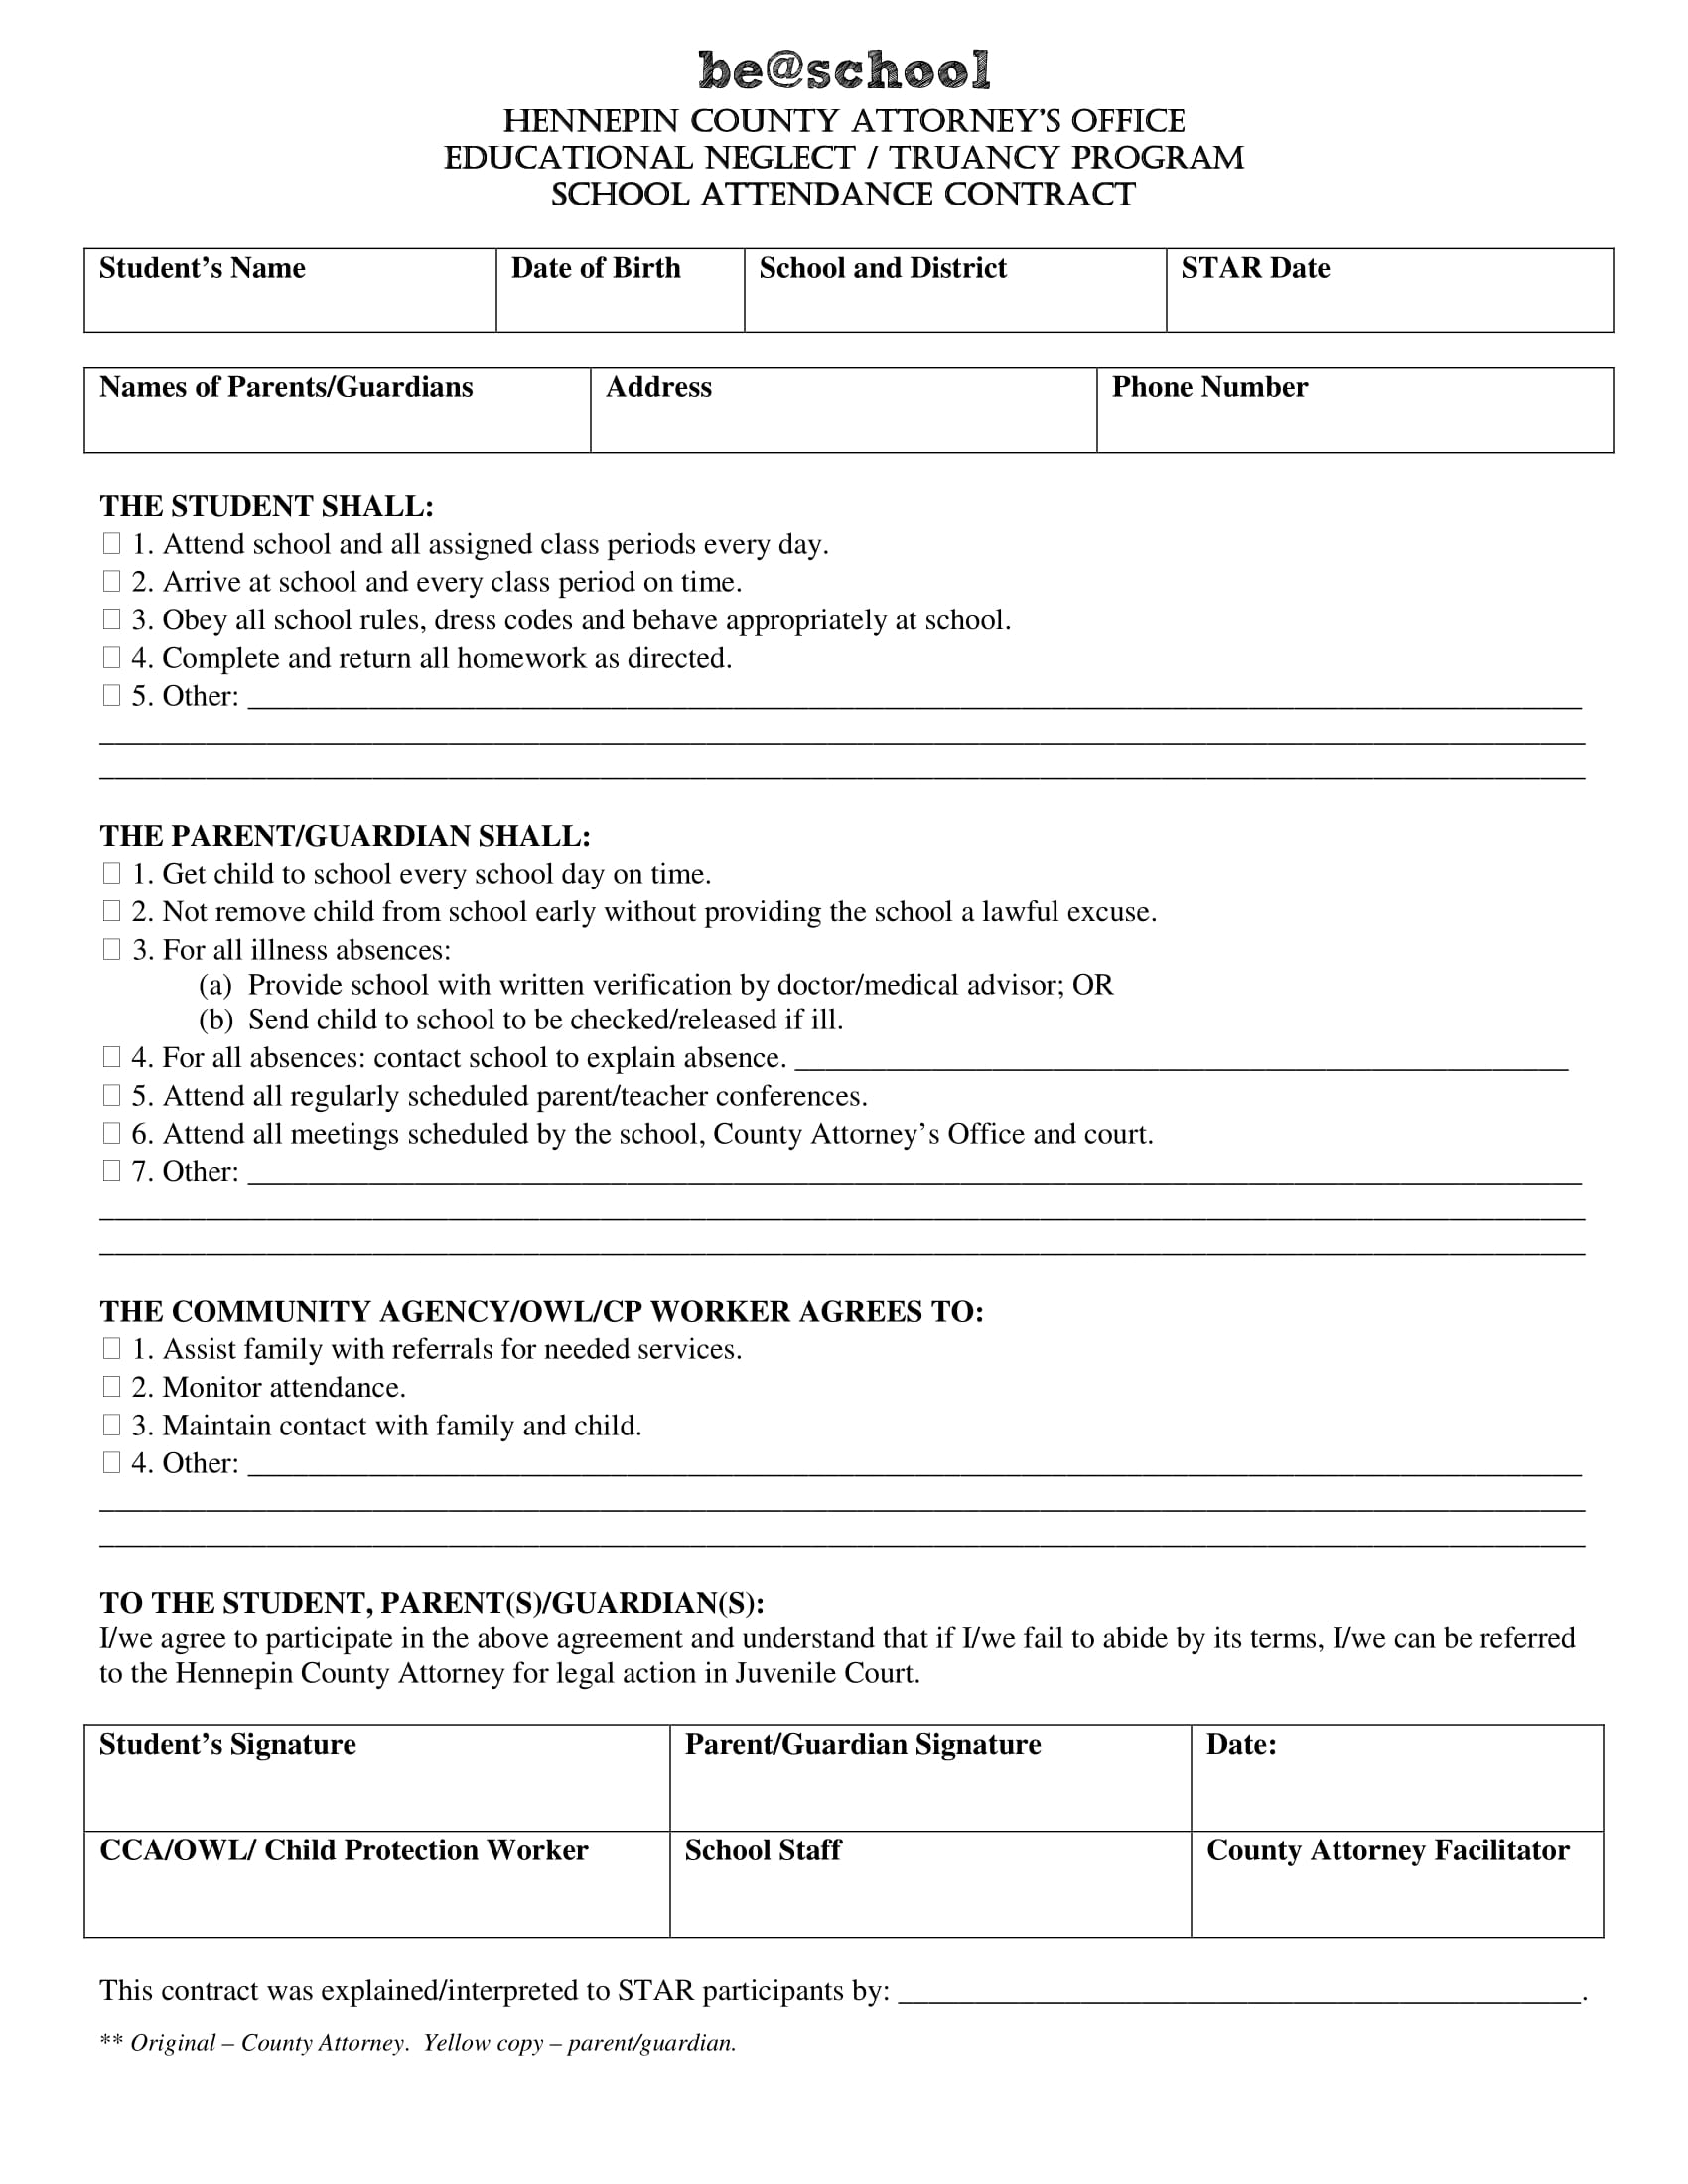 school contract template for student attendance agreement example 1